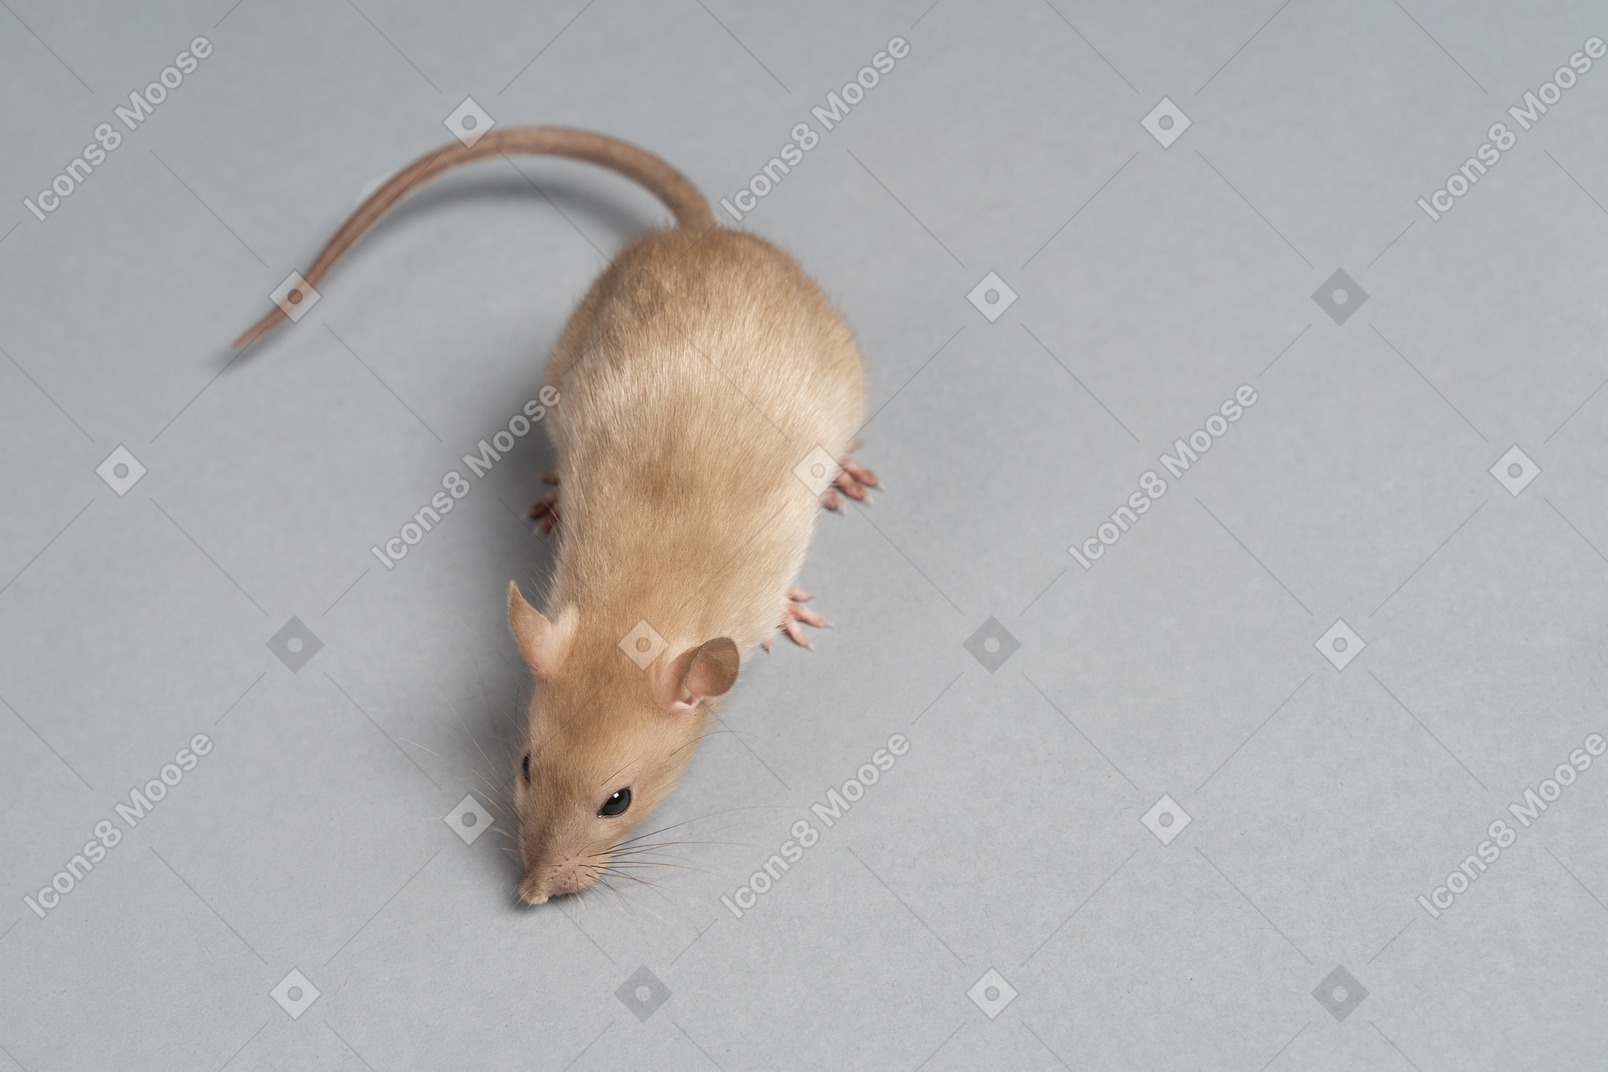 A cute gray mouse sniffing